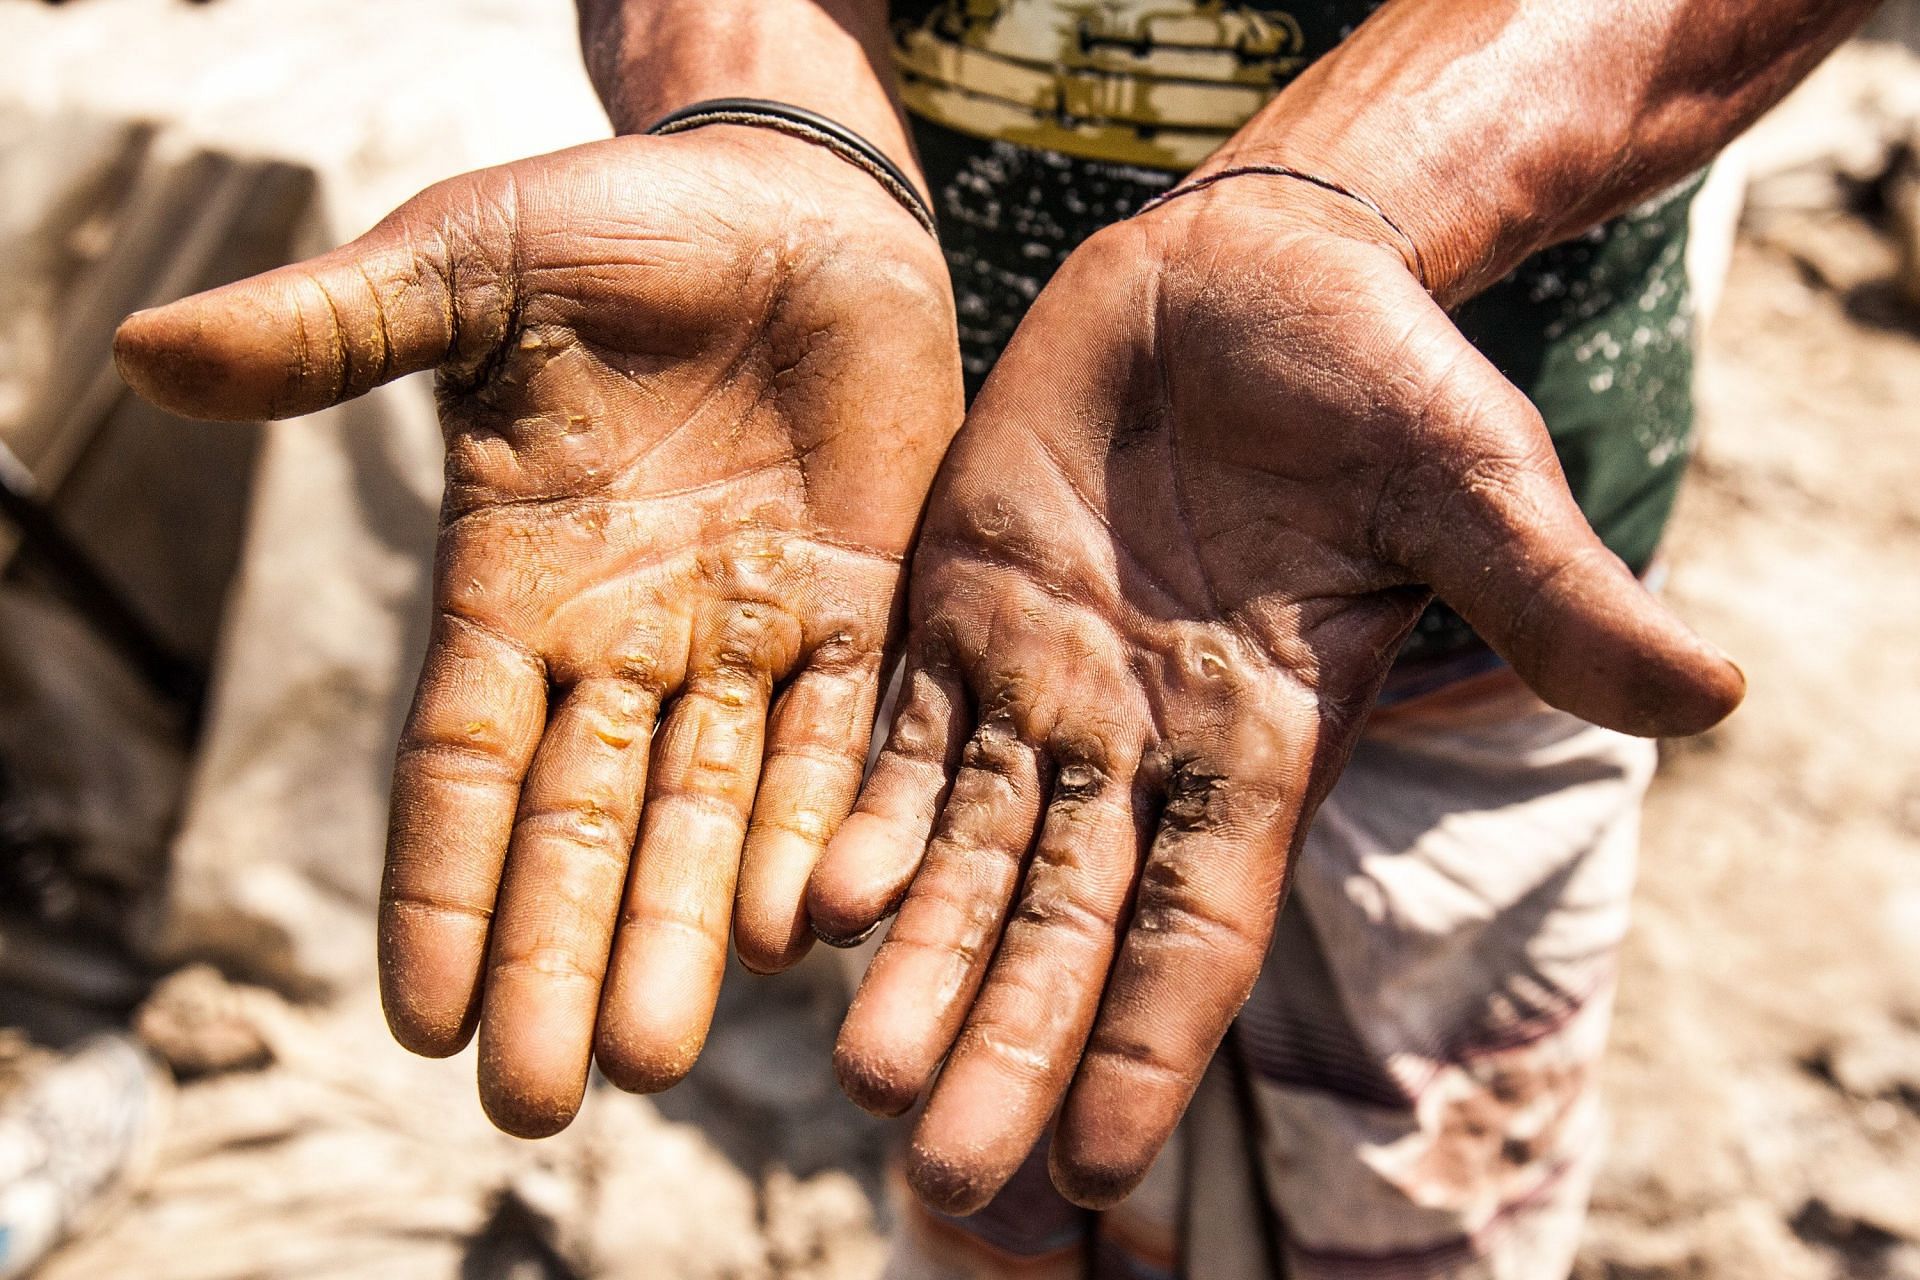 Calluses can form anywhere on the hands, elbows, knees or foot. (Image via Pexels/M Mahbub A Alahi)